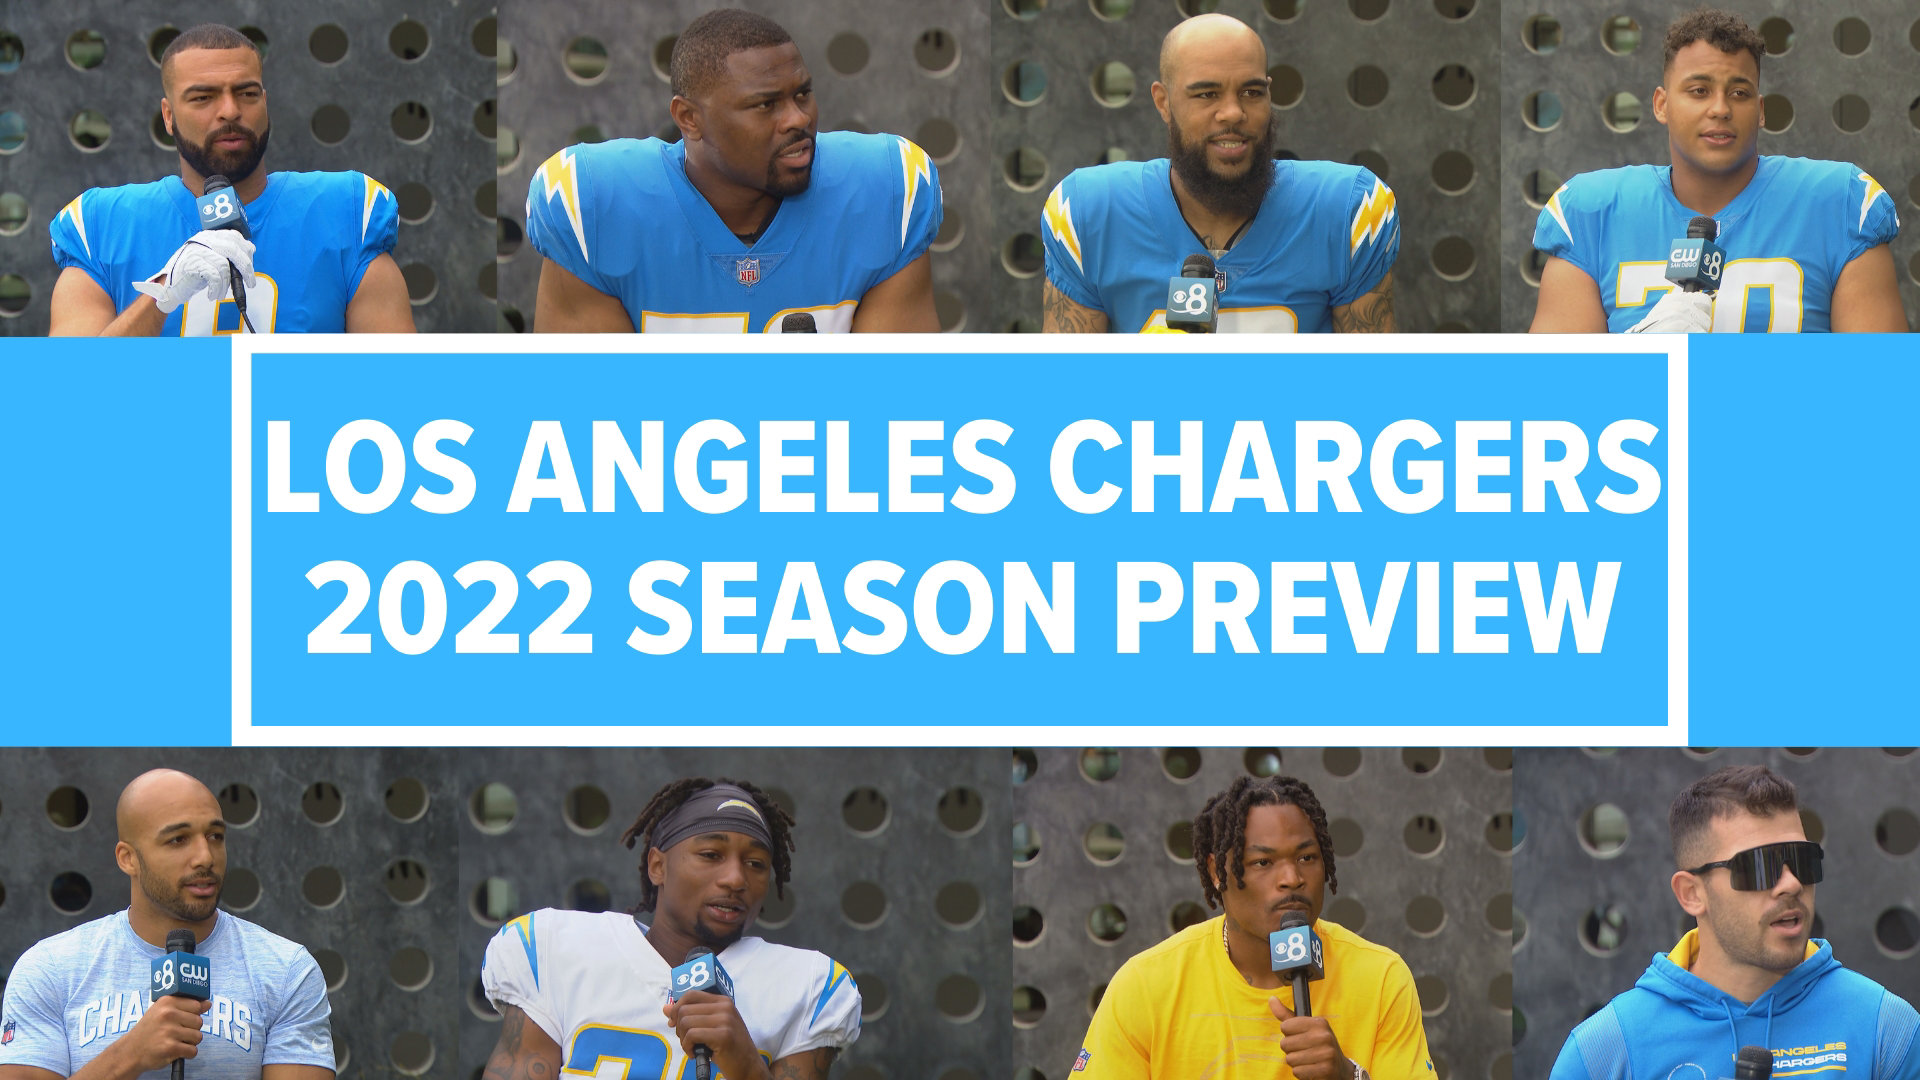 Khalil Mack, Derwin James, Keenan Allen, Austin Ekeler, Rashawn Slater, Kyle Van Noy & Asante Samuel Jr. talked about the roster and what they can accomplish in 2022